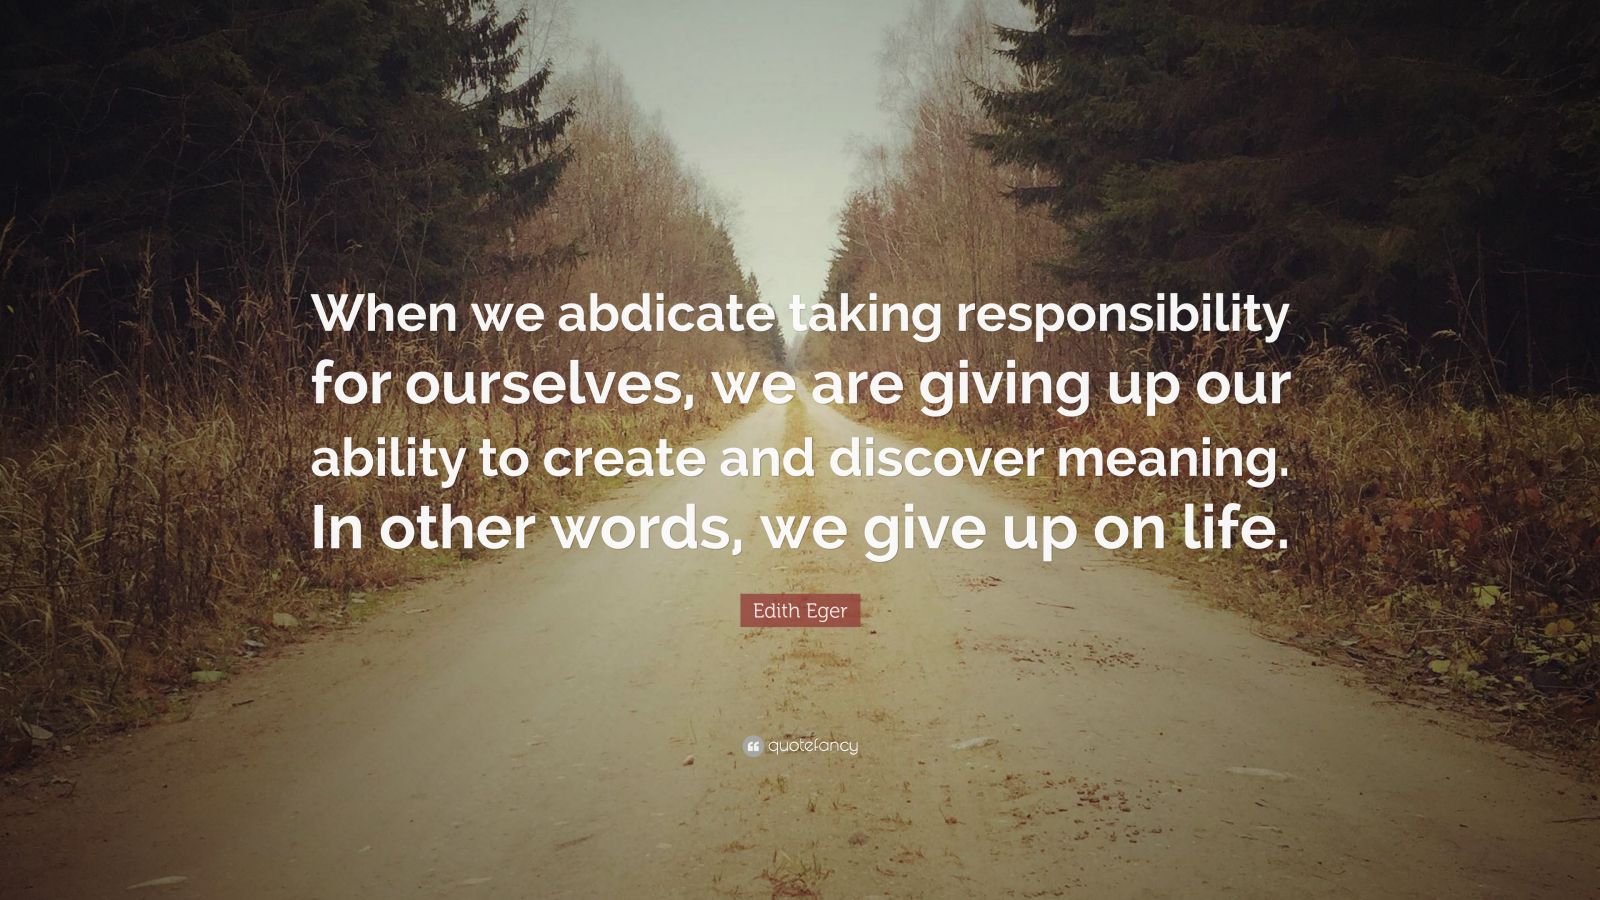 Edith Eger Quote: “When we abdicate taking responsibility for ourselves ...